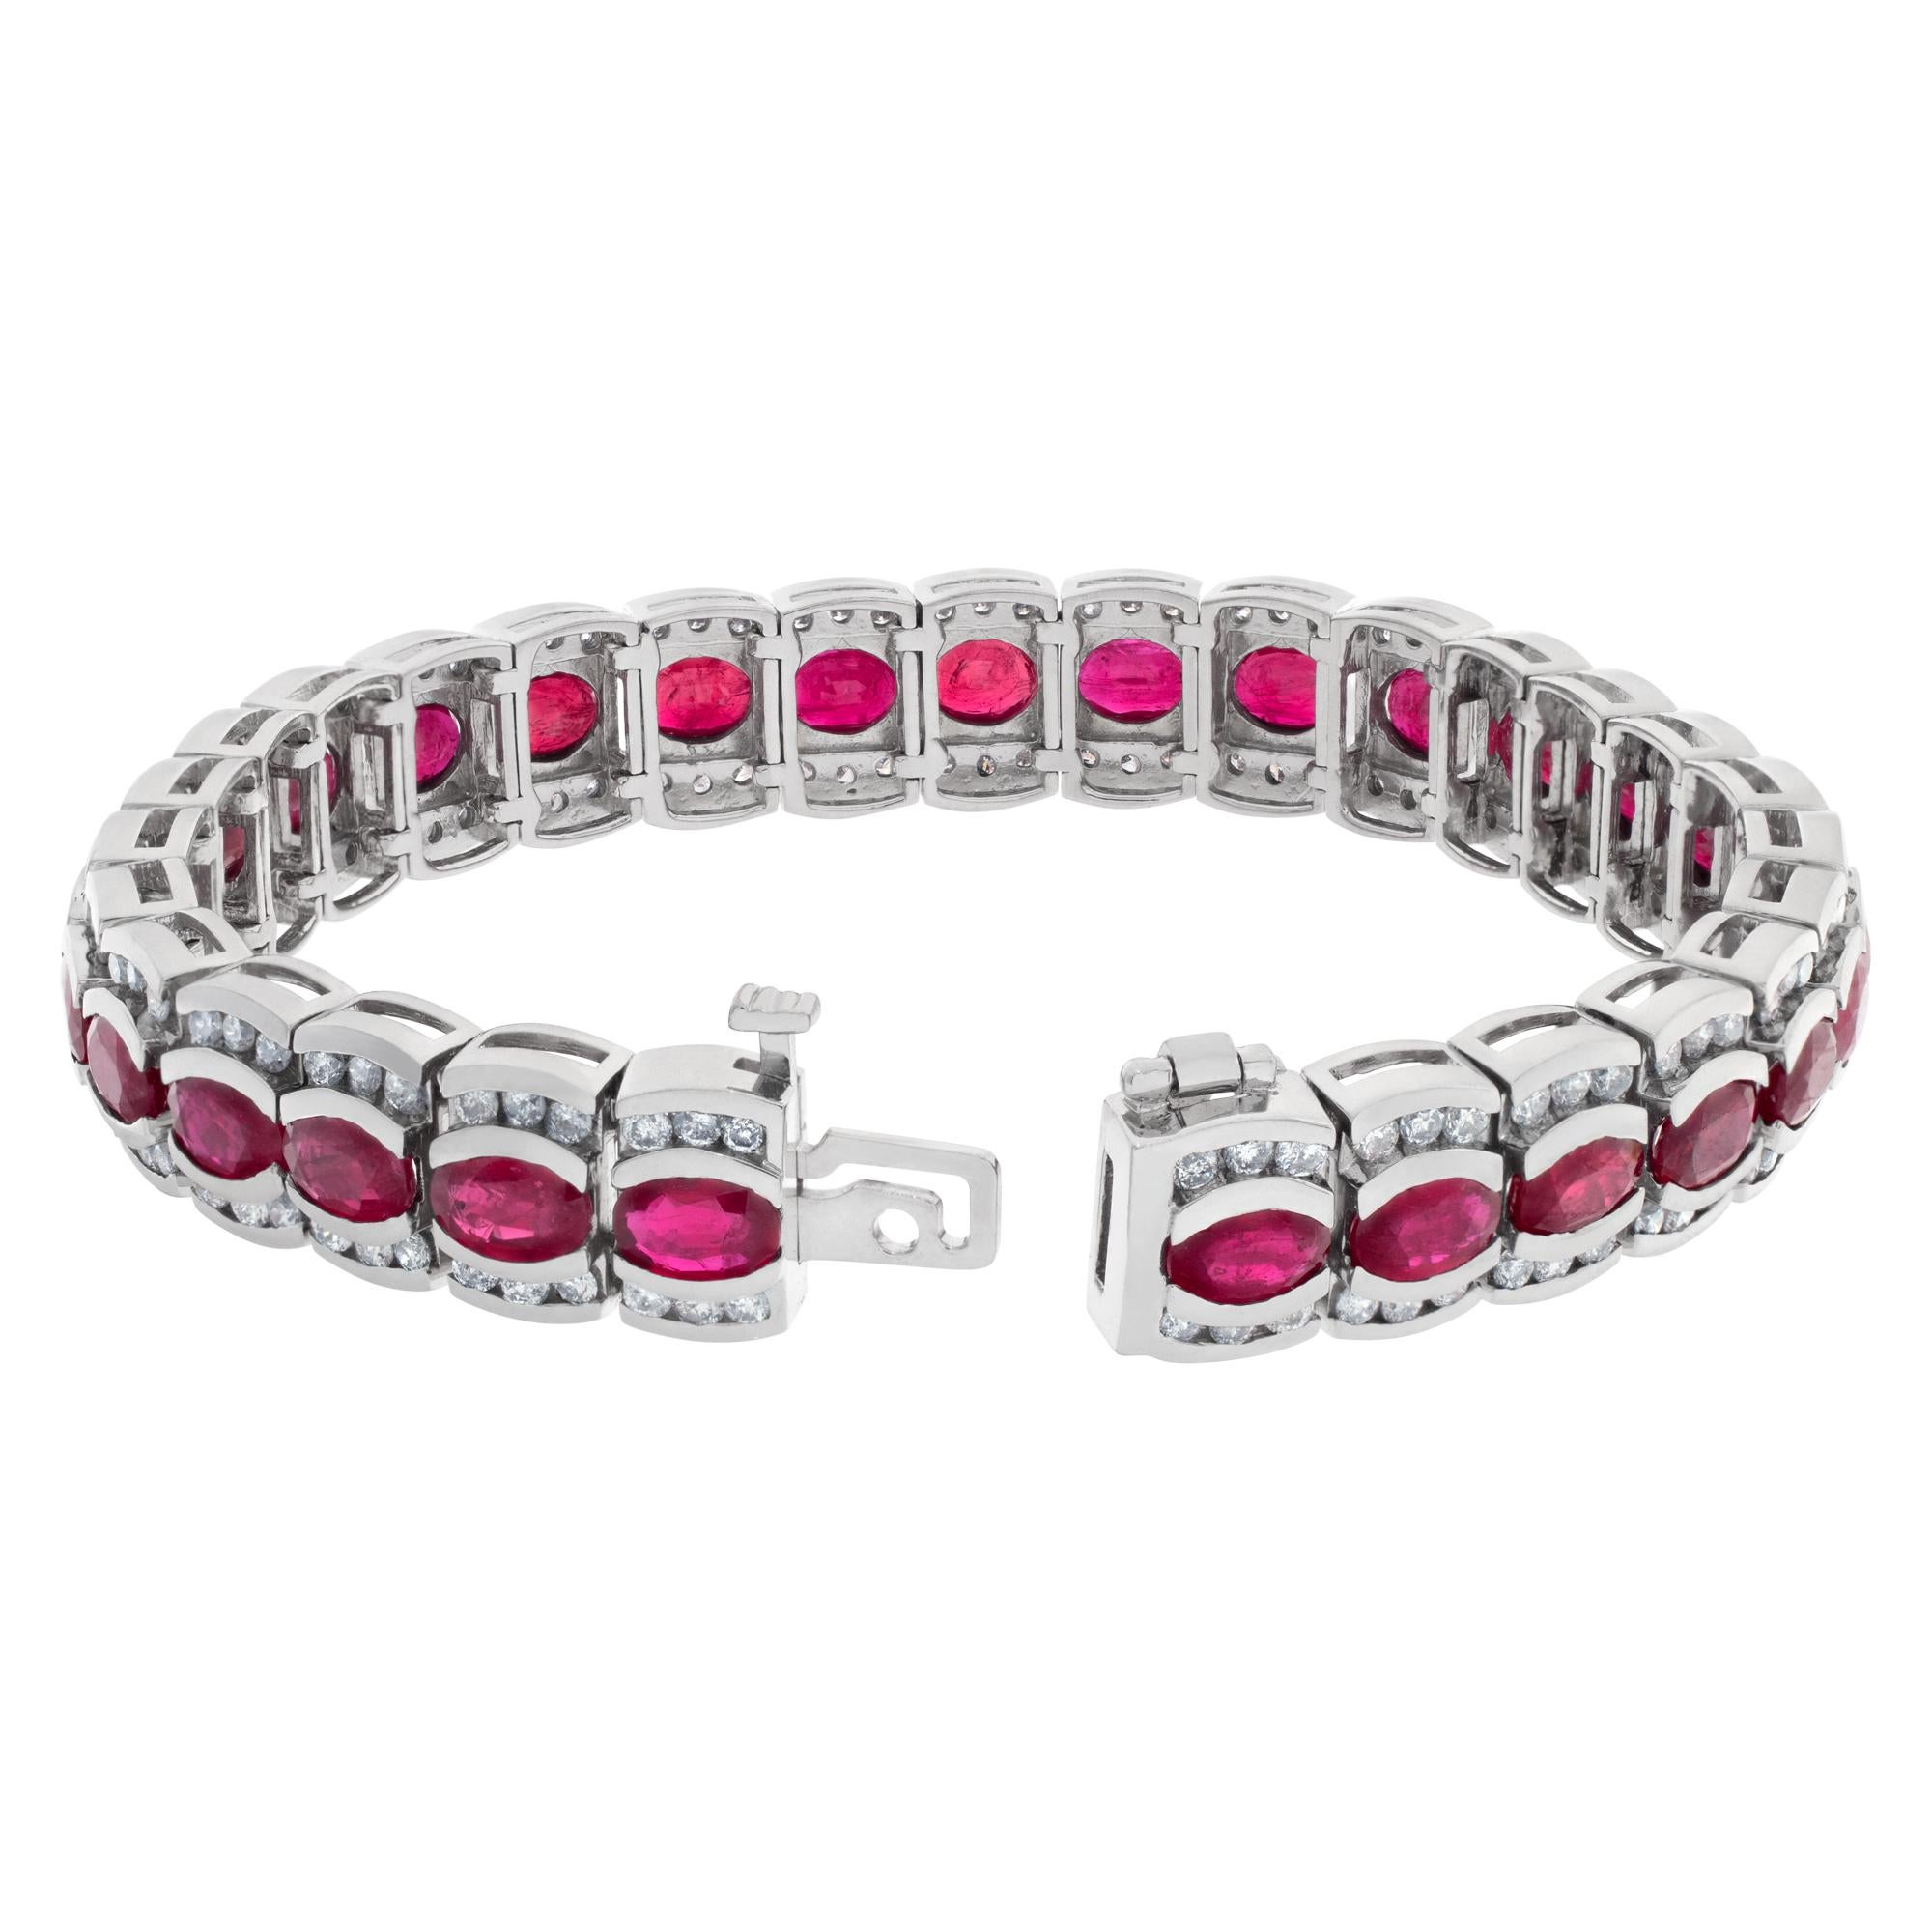 Women's Line Bracelet in 14k White Gold with 4 Cts in Diamonds and 17.10 Cts in Rubies For Sale